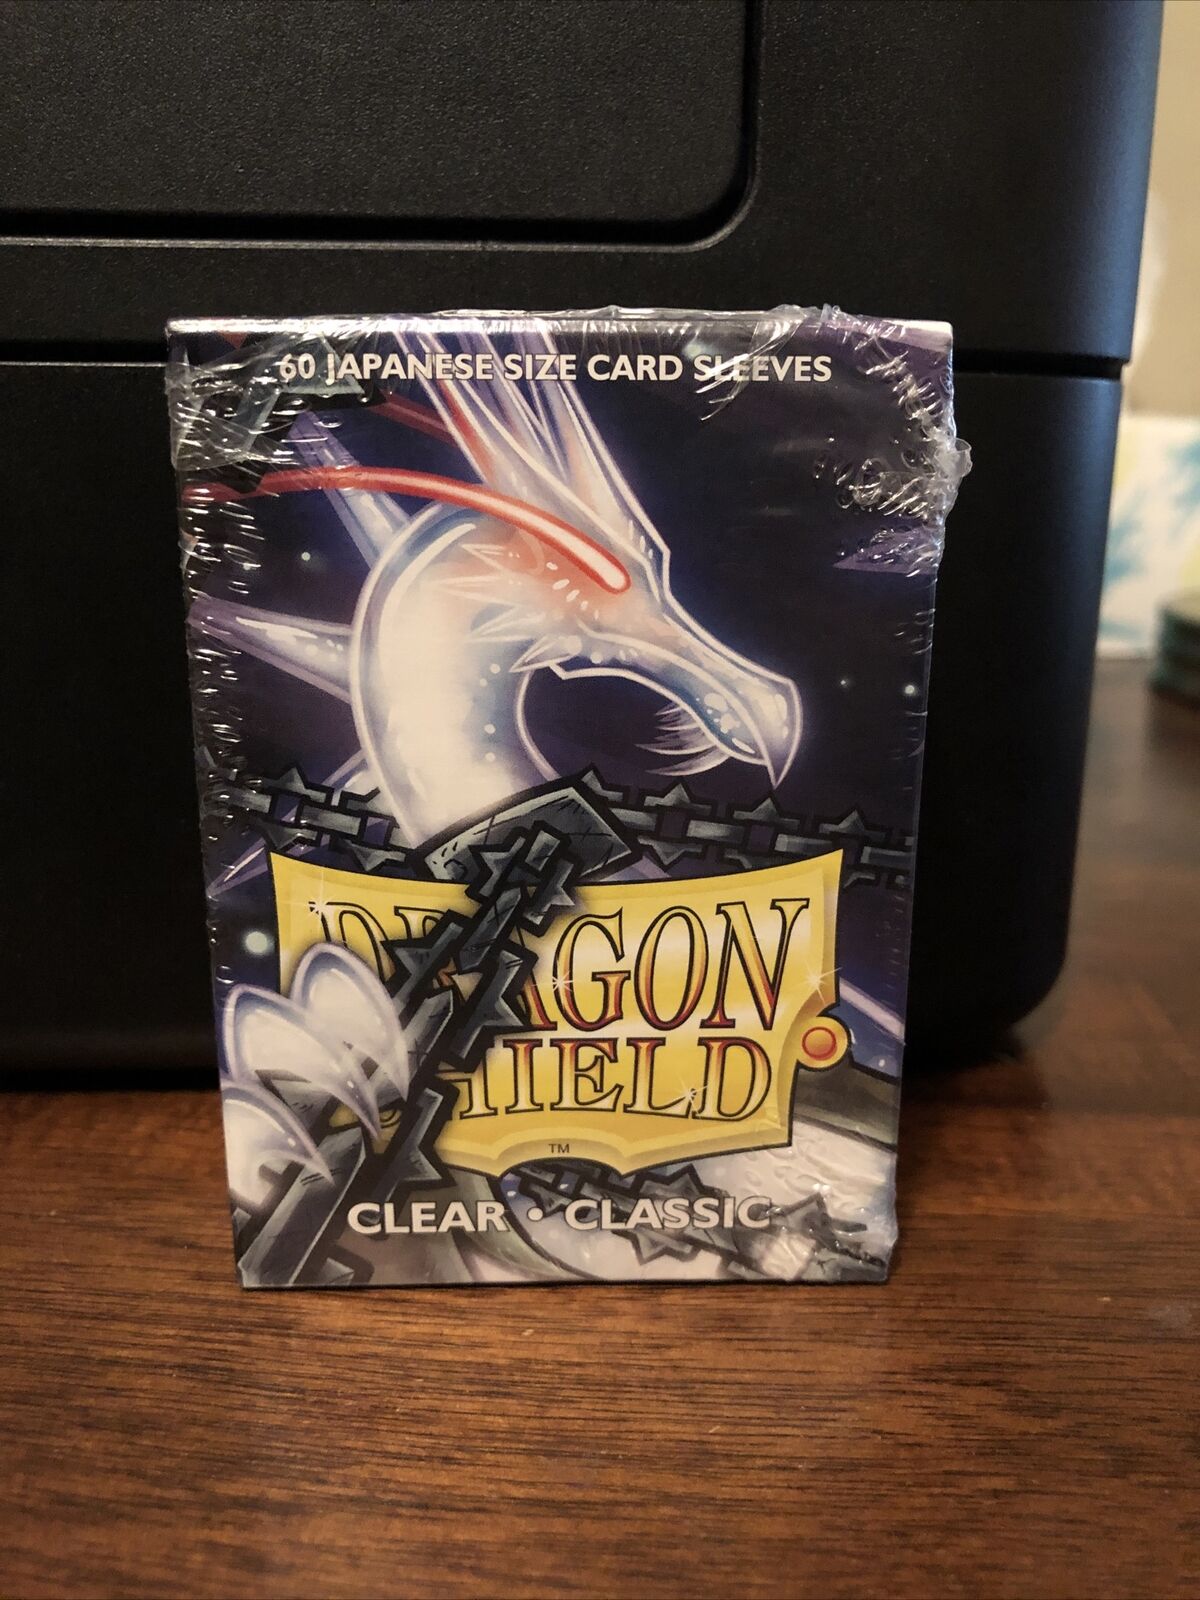 Dragon Shield Sleeves Pack of 60 Japanese Size Card Sleeves Clear Classic